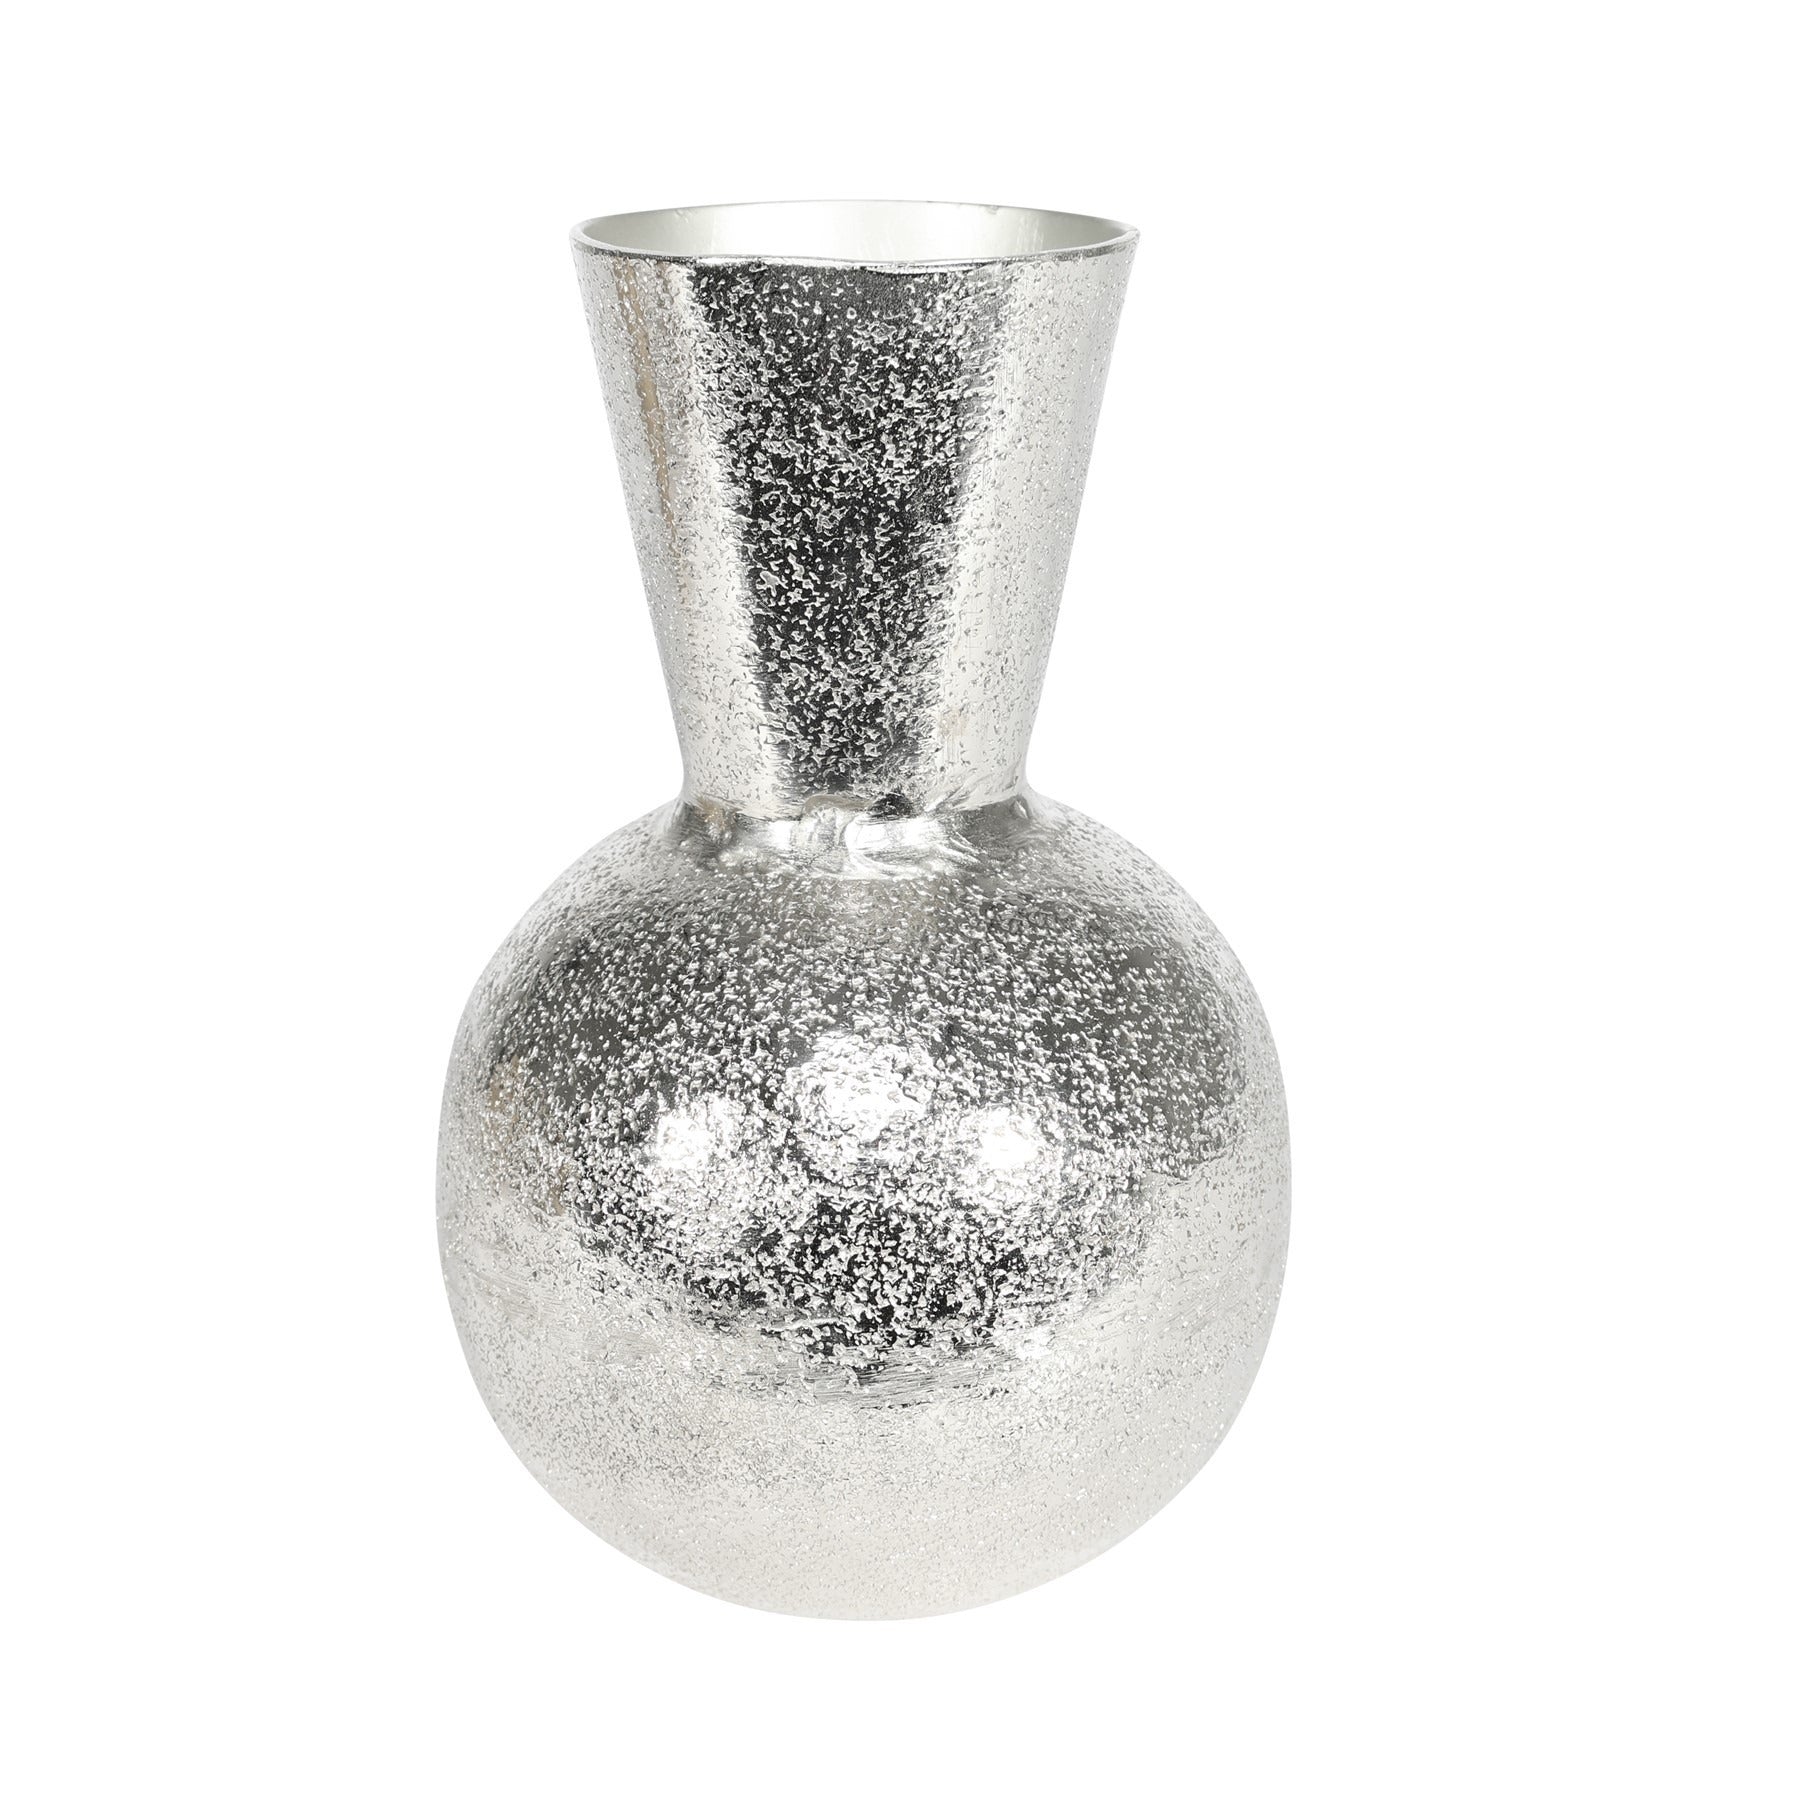 View Covent Garden Cafe Vase Silver 15cm information